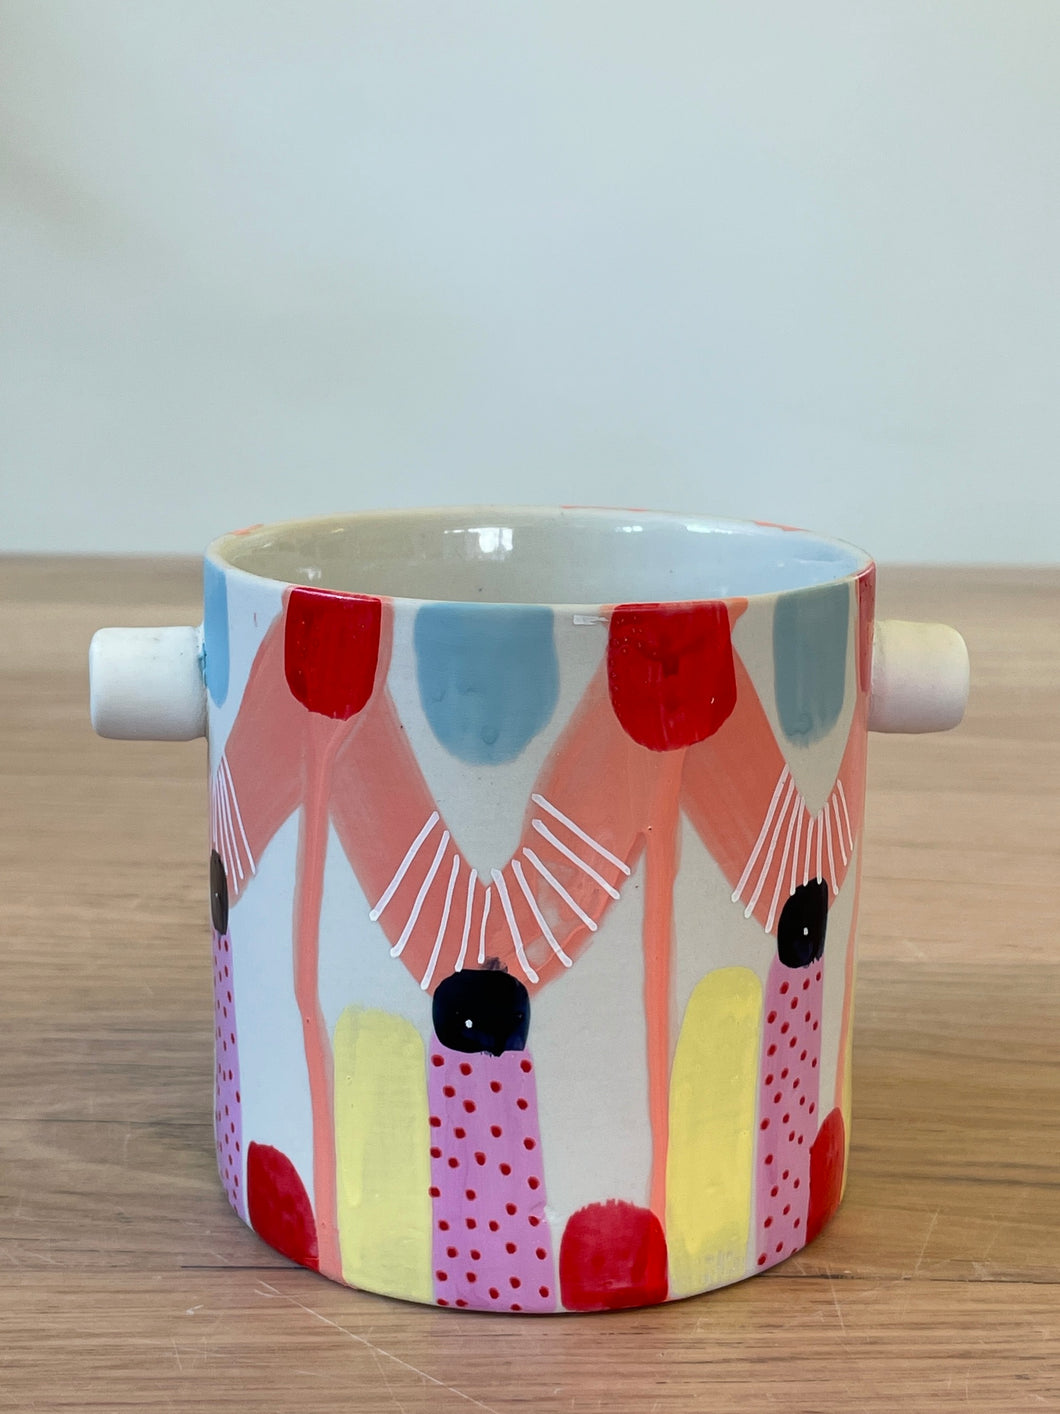 Clare Whitney - Hand Painted Planter Pots